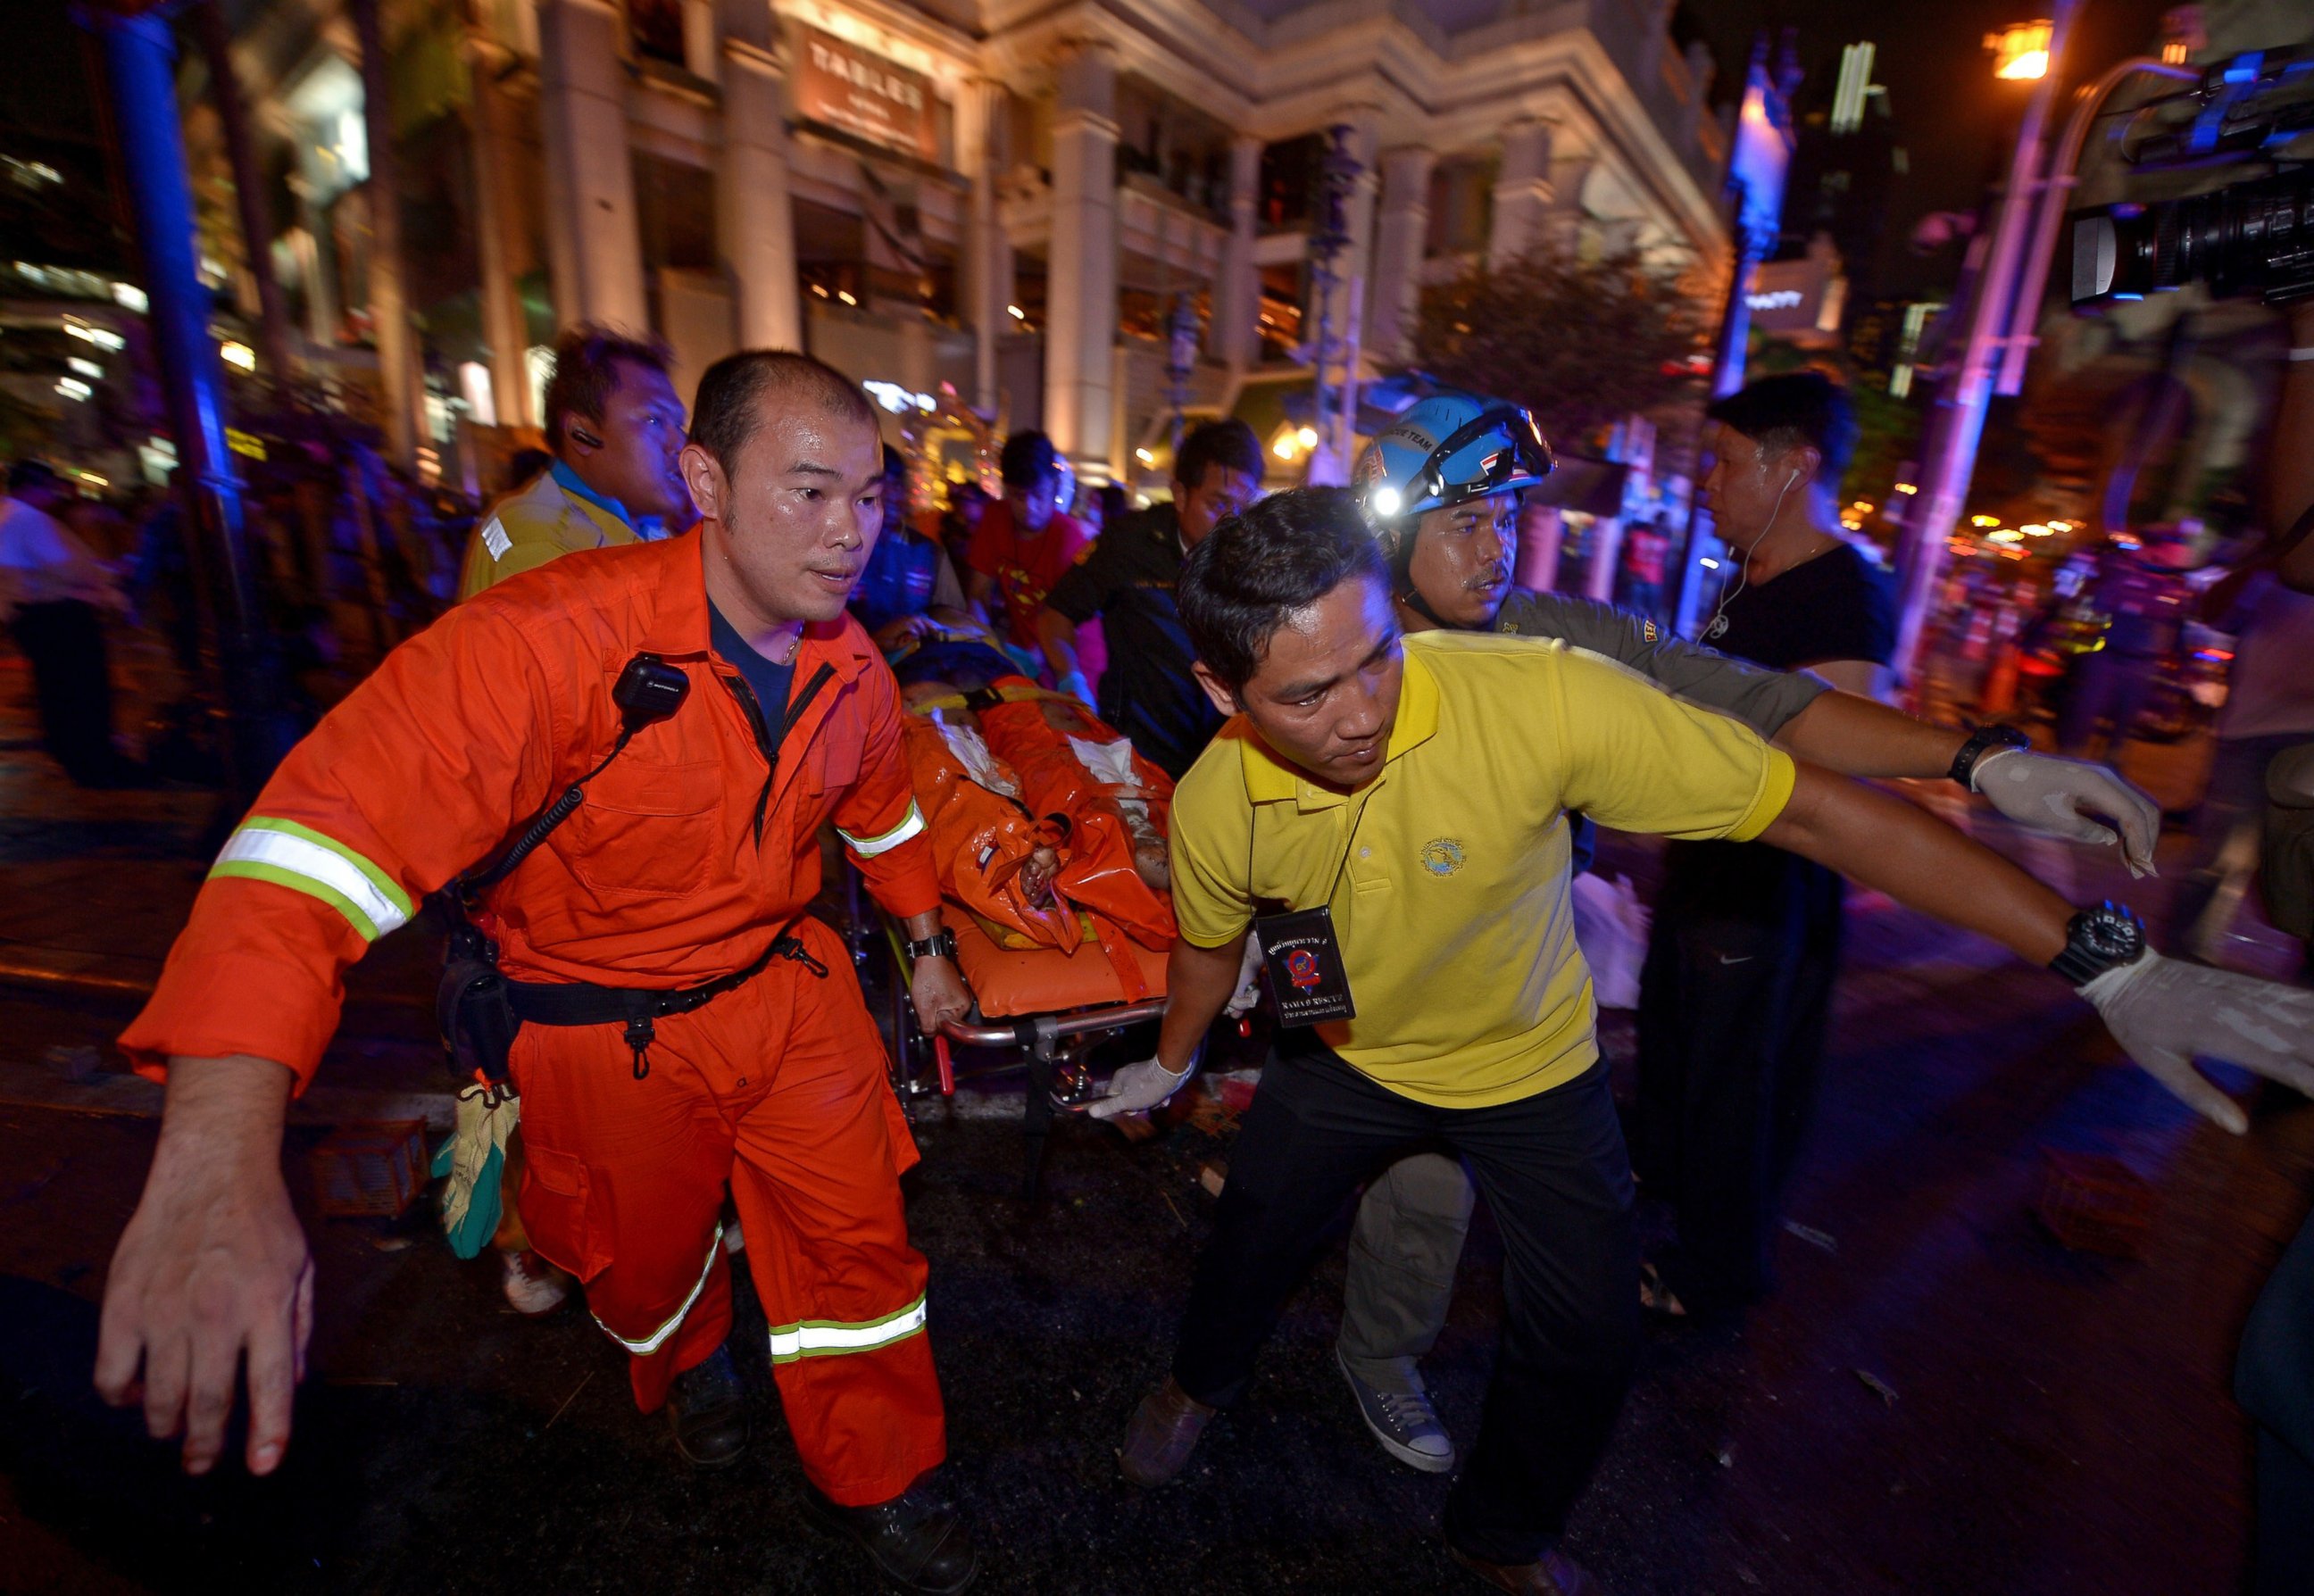 PHOTO: Thai rescue workers carry an injured person after a bomb exploded outside a religious shrine in central Bangkok late on Aug. 17, 2015.